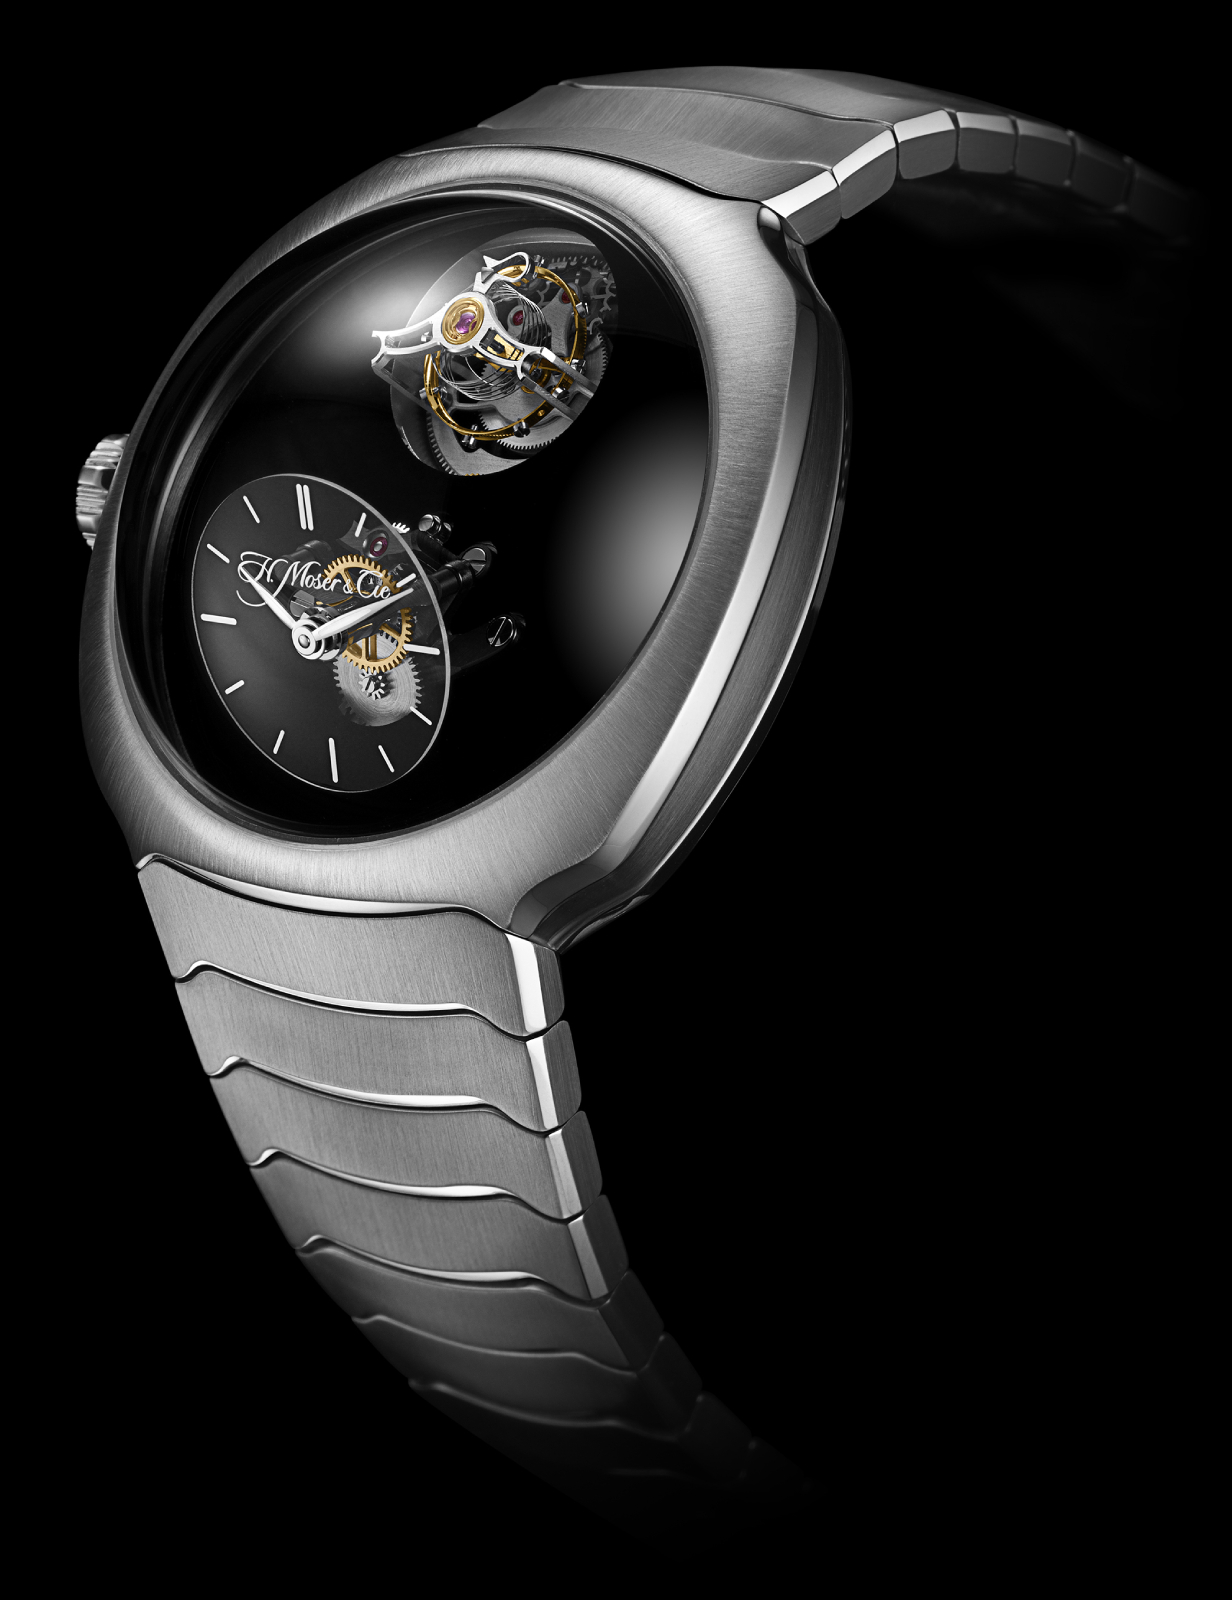 H. Moser & Cie. Streamliner Cylindrical Tourbillon Only Watch